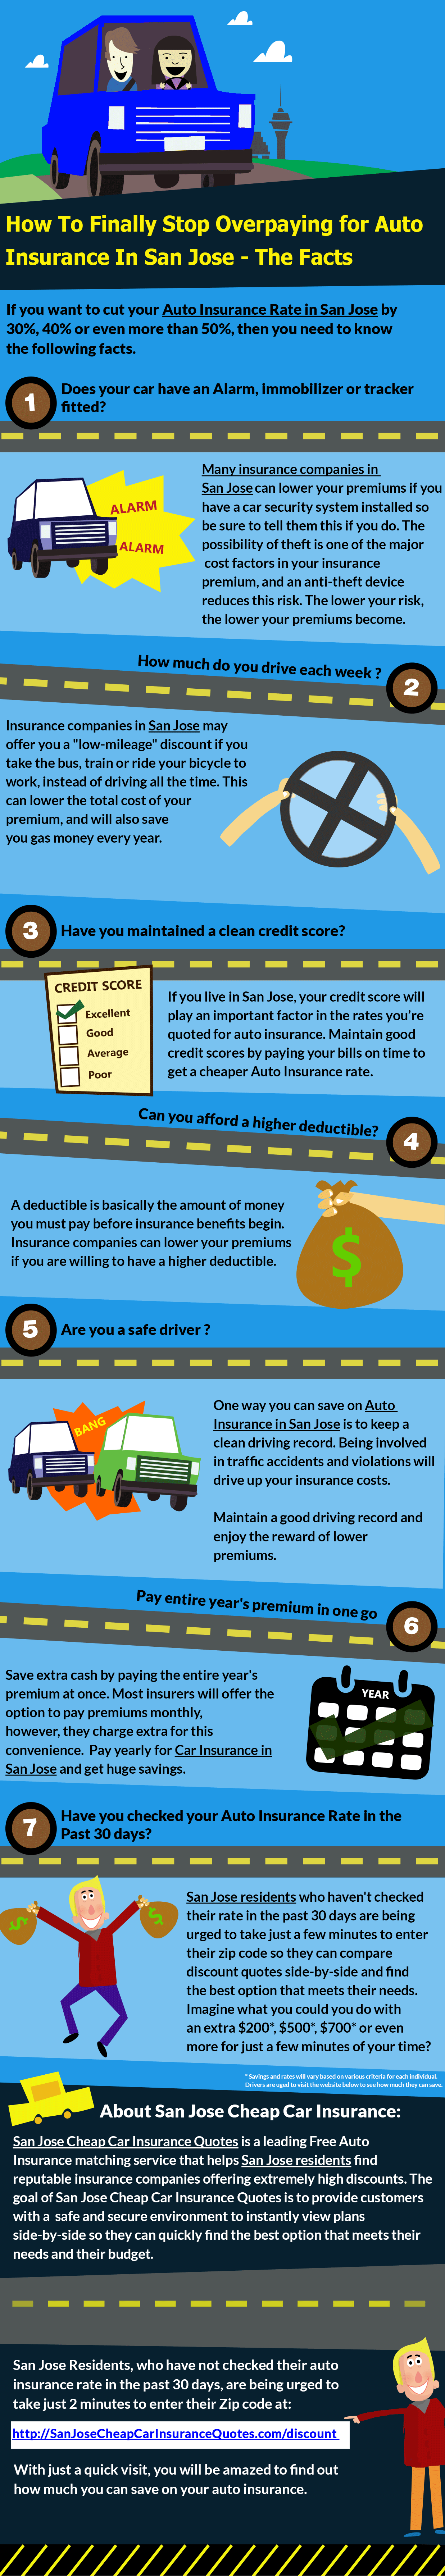 Cheap Auto Insurance San Jose - Save up to 50% or more on your auto insurance in San Jose.... Infographic